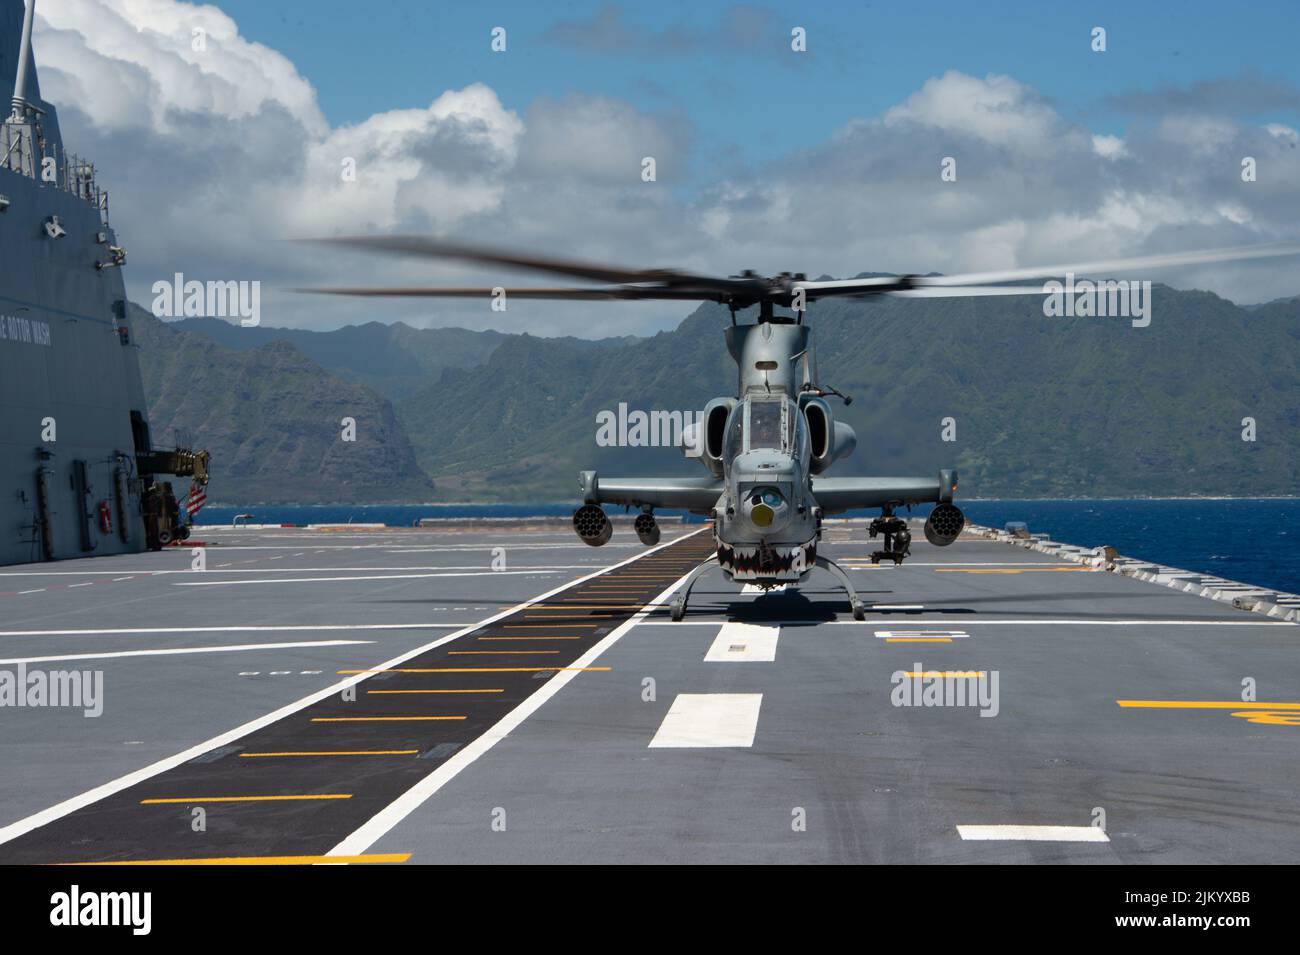 PACIFIC OCEAN (Aug. 1, 2022) U.S. Marine Corps AH-1Z Viper, attached to Marine Light Attack Helicopter Squadron (HMLA) 169, conducts flight operations with Royal Australian Navy Canberra-class landing helicopter dock ship HMAS Canberra (L02), during Rim of the Pacific (RIMPAC) 2022, Aug. 1. Twenty-six nations, 38 ships, three submarines, more than 170 aircraft and 25,000 personnel are participating in RIMPAC from June 29 to Aug. 4 in and around the Hawaiian Islands and Southern California. The world's largest international maritime exercise, RIMPAC provides a unique training opportunity while Stock Photo